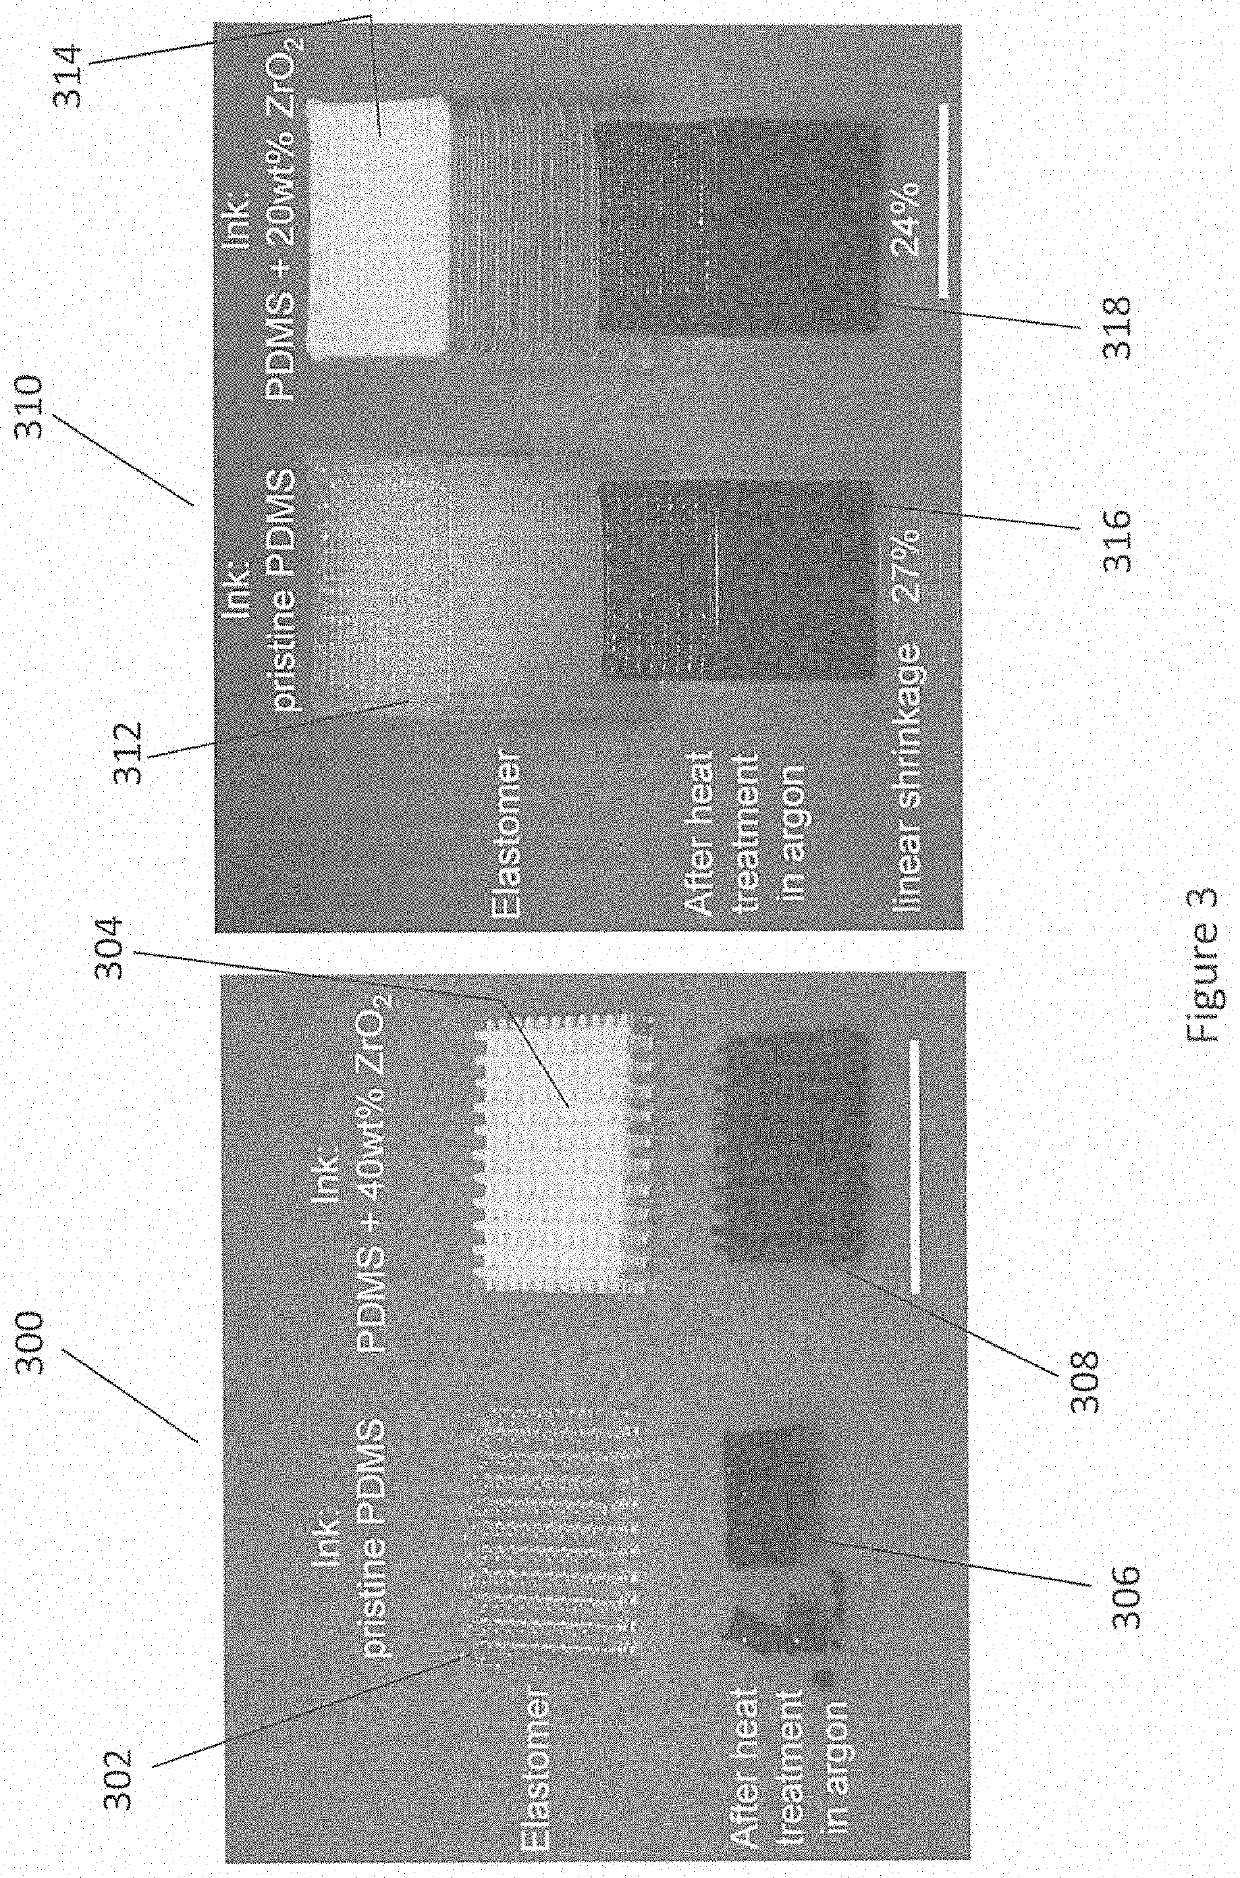 Systems and method for four-dimensional printing of elastomer-derived ceramic structures by compressive buckling-induced method